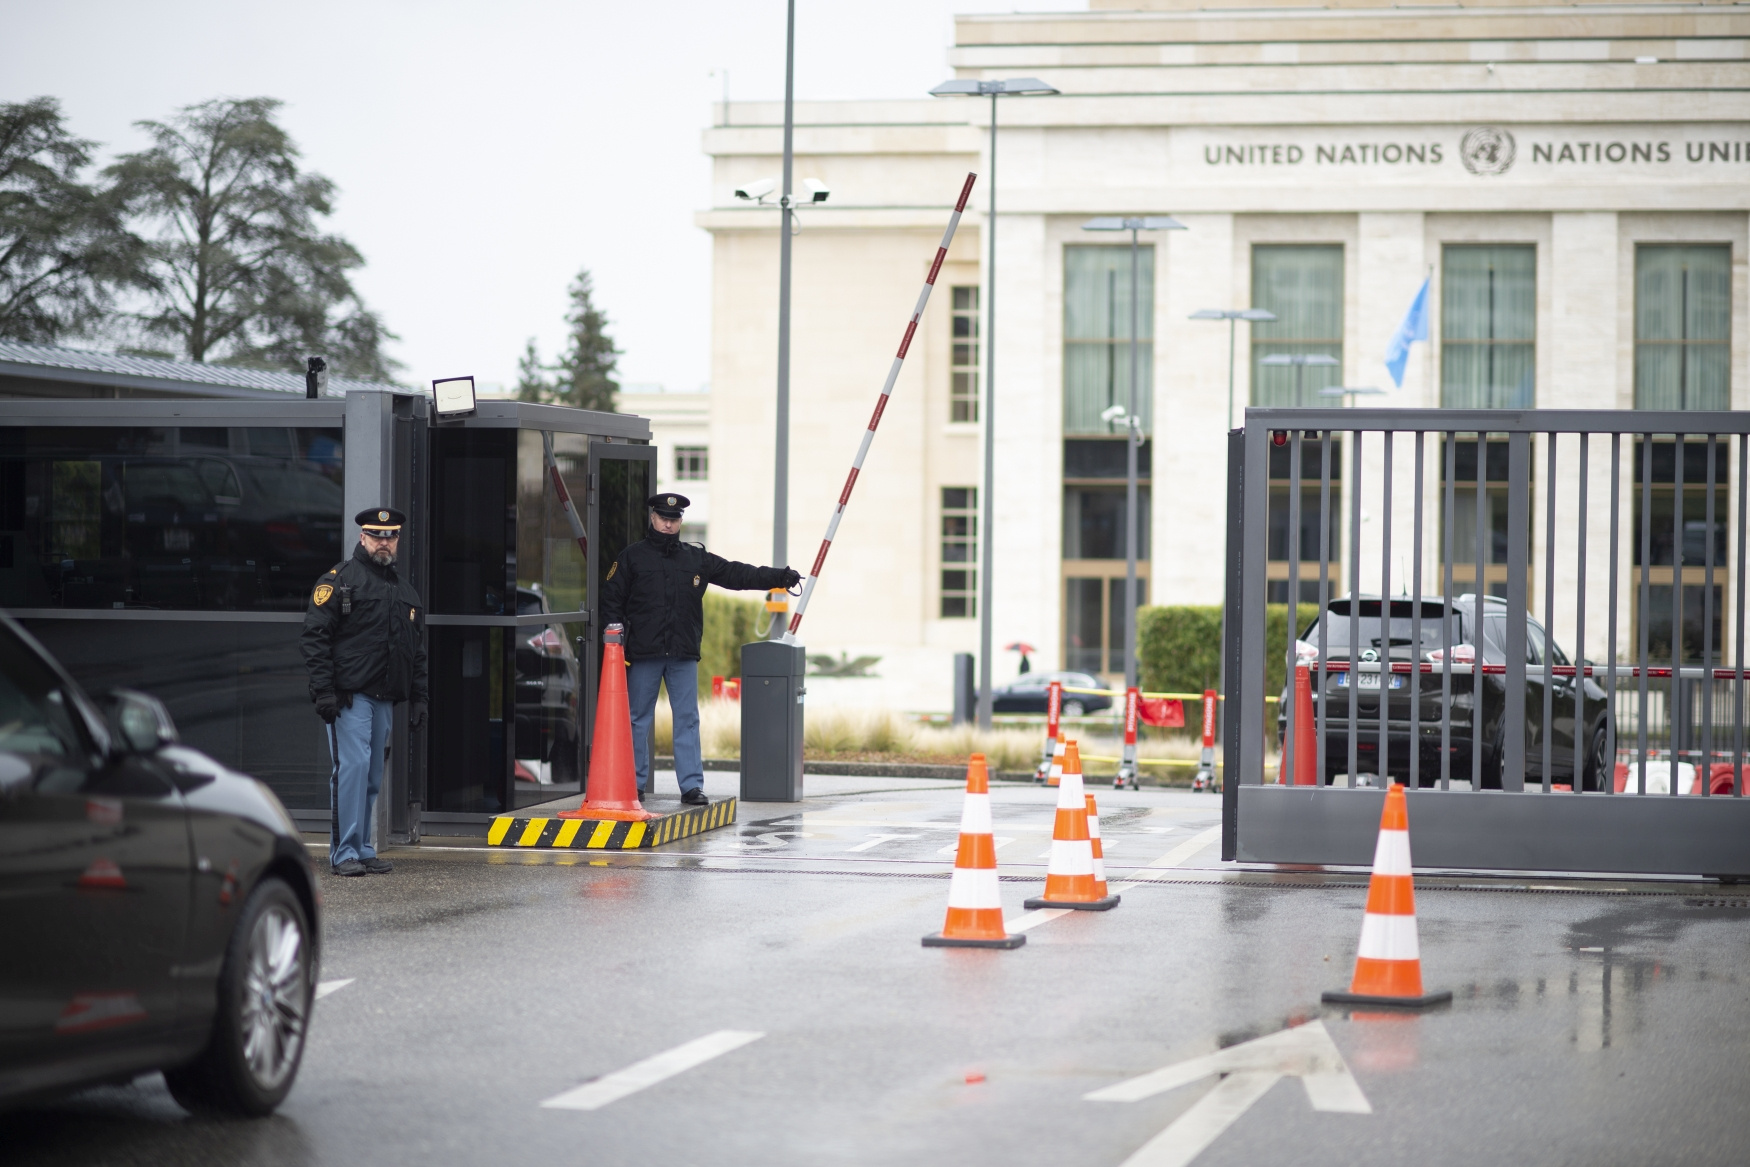 Two UN Security staff are standing at one of the entrance gates at the Palais des Nations. A car is about to enter, the gate is open. The background shows one of the UN buildlings